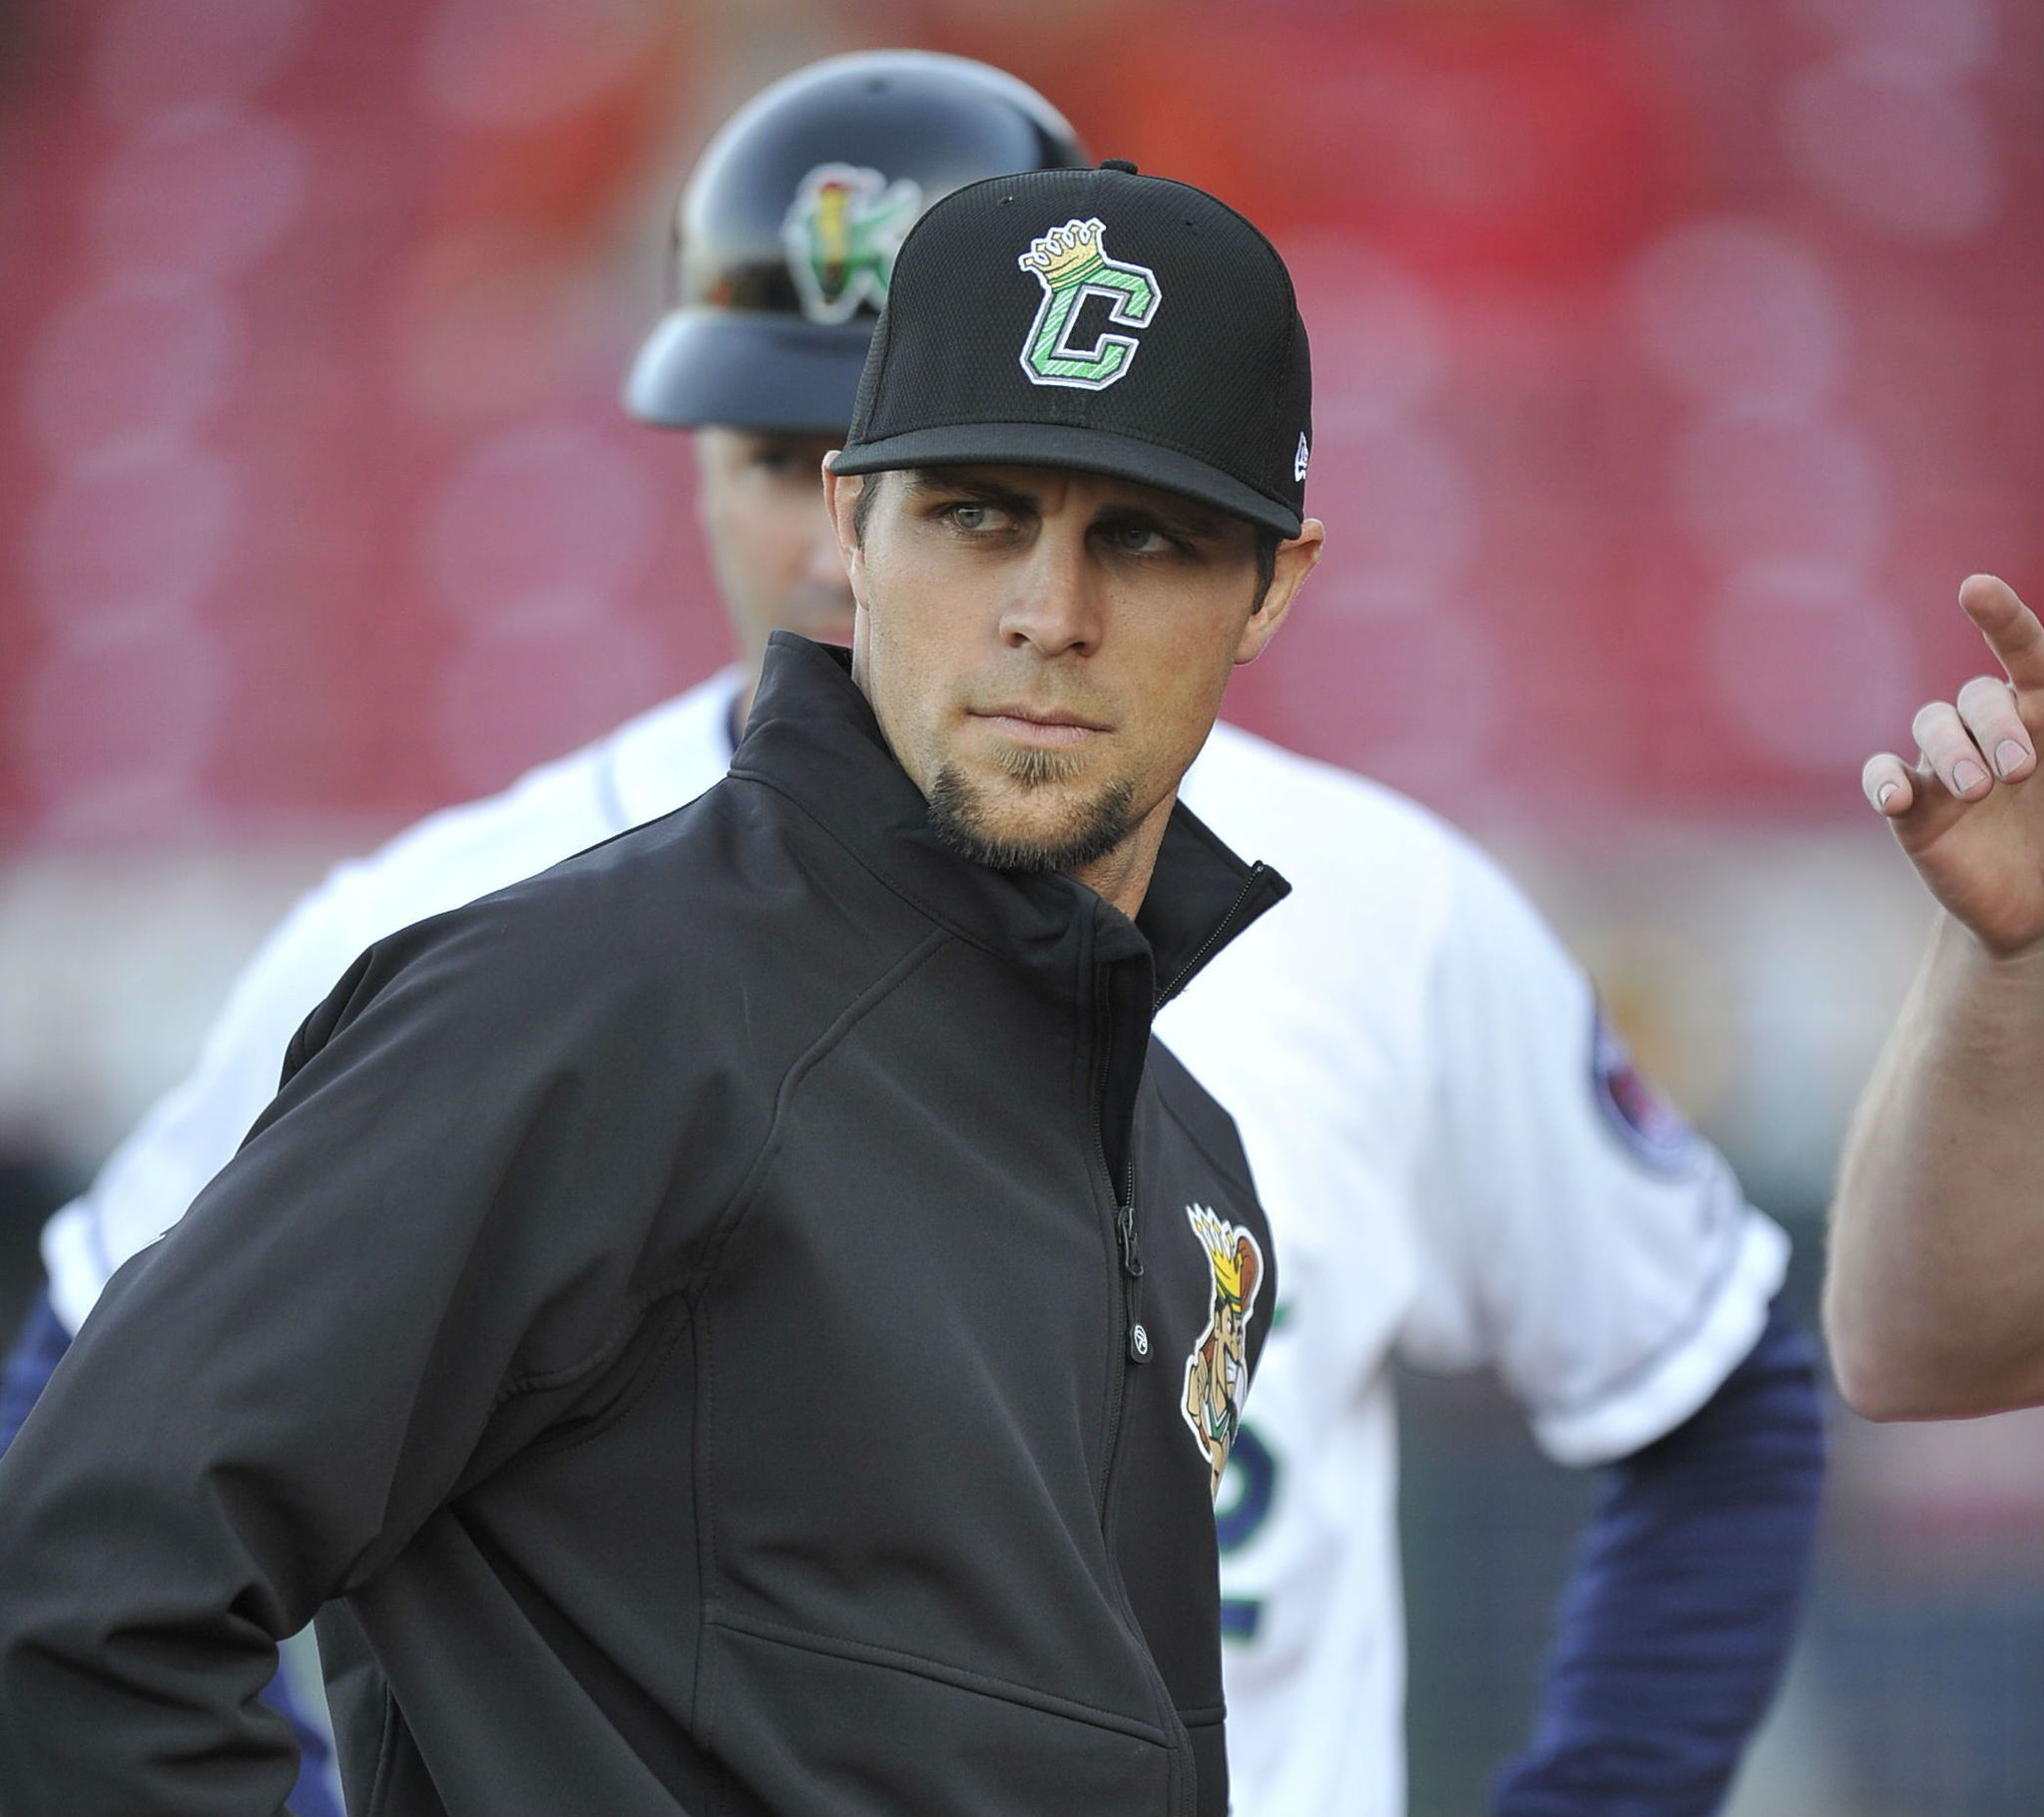 Lake Stevens High School graduate Mitch Canham is in his first season as manager of the Clinton Lumberkings, the Seattle Mariners’ affiliate in the Class A Midwest League.